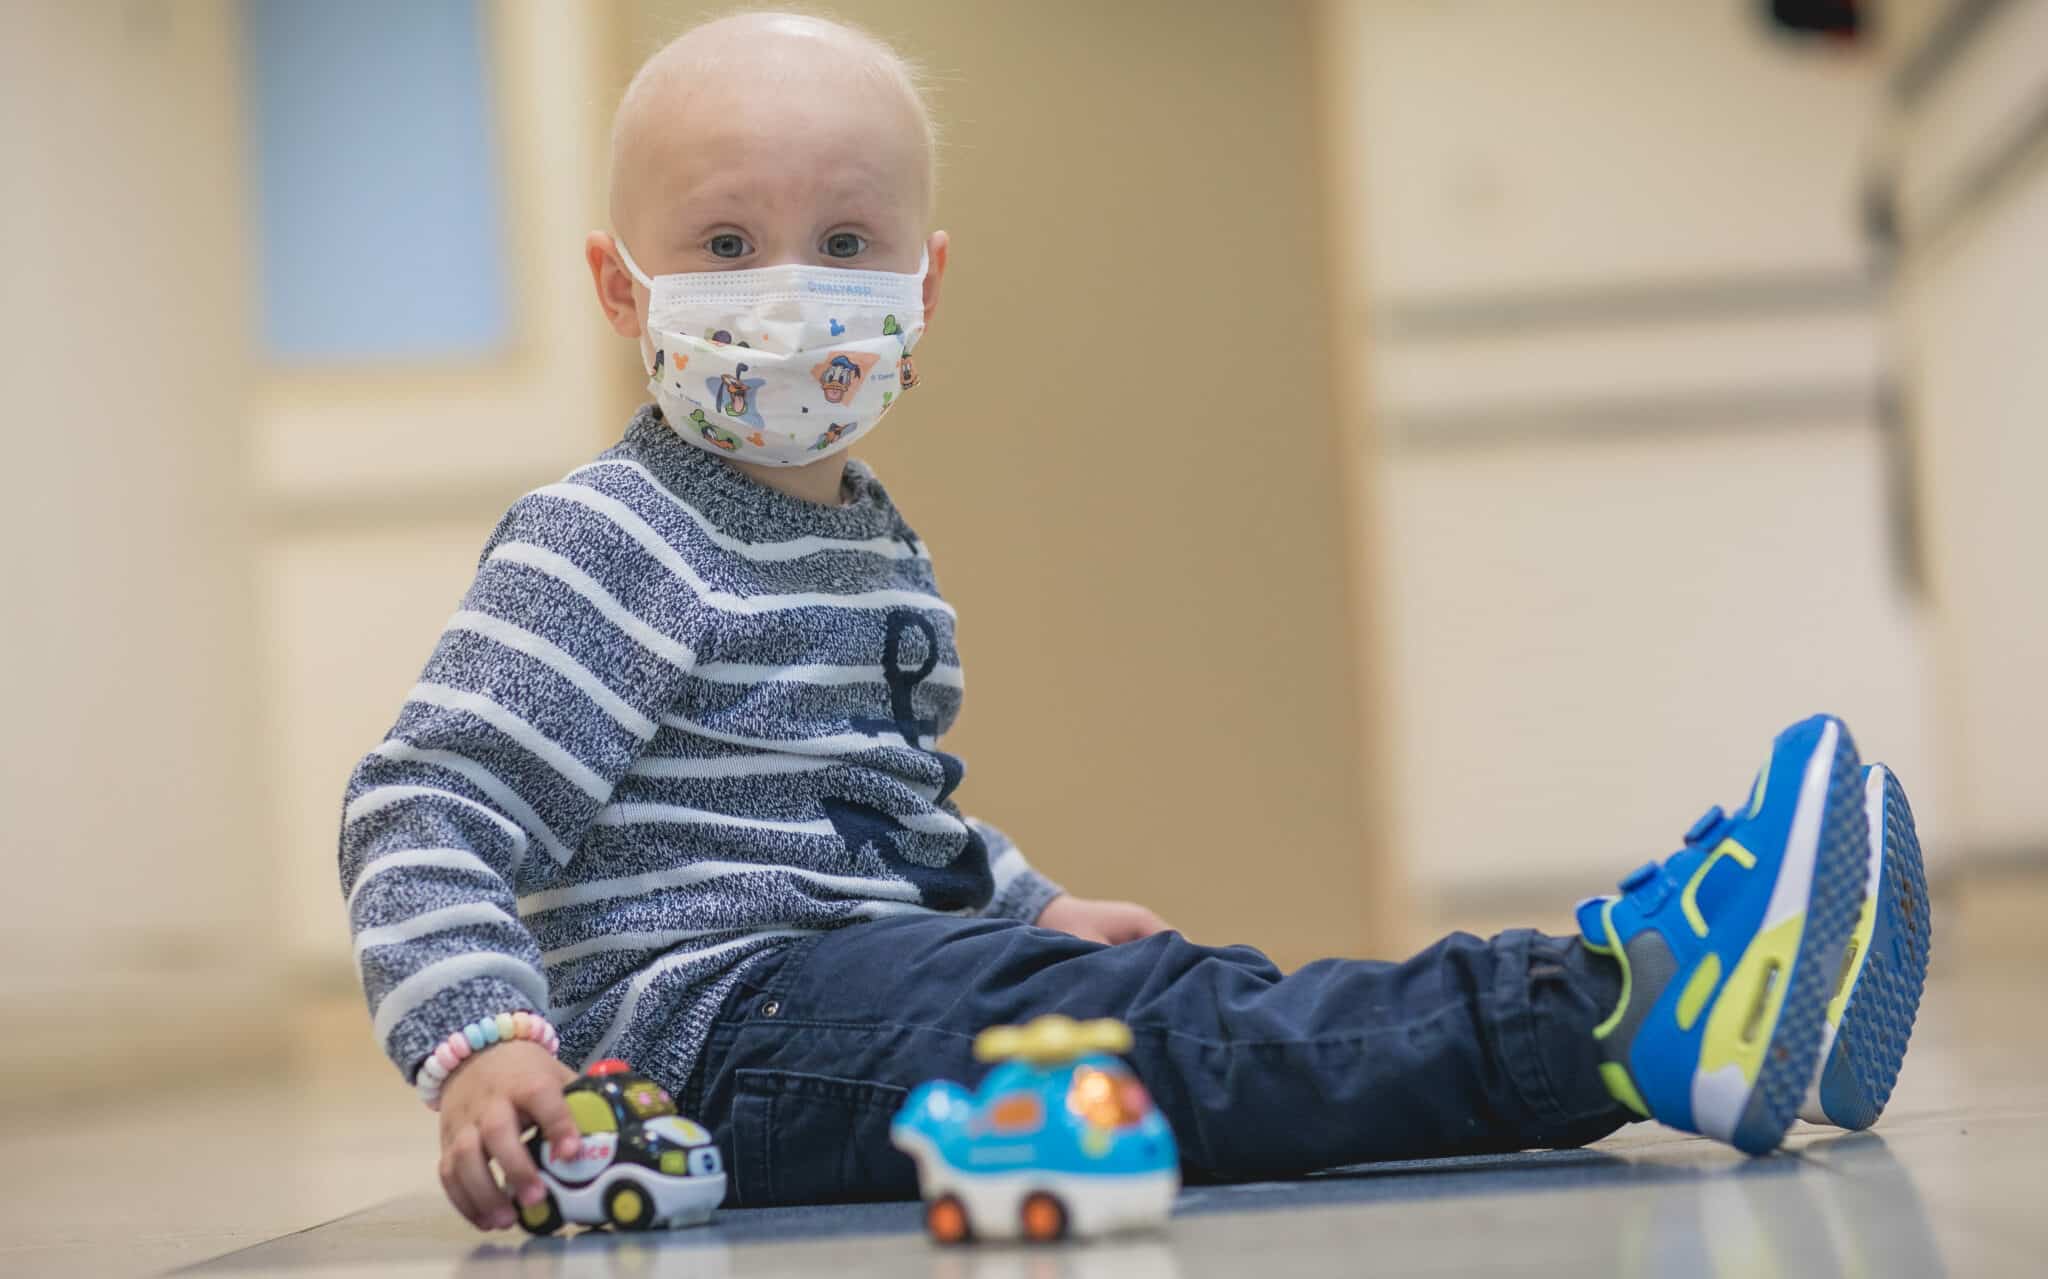 A little child with cancer wearing a cloth mask while playing with toy cars.